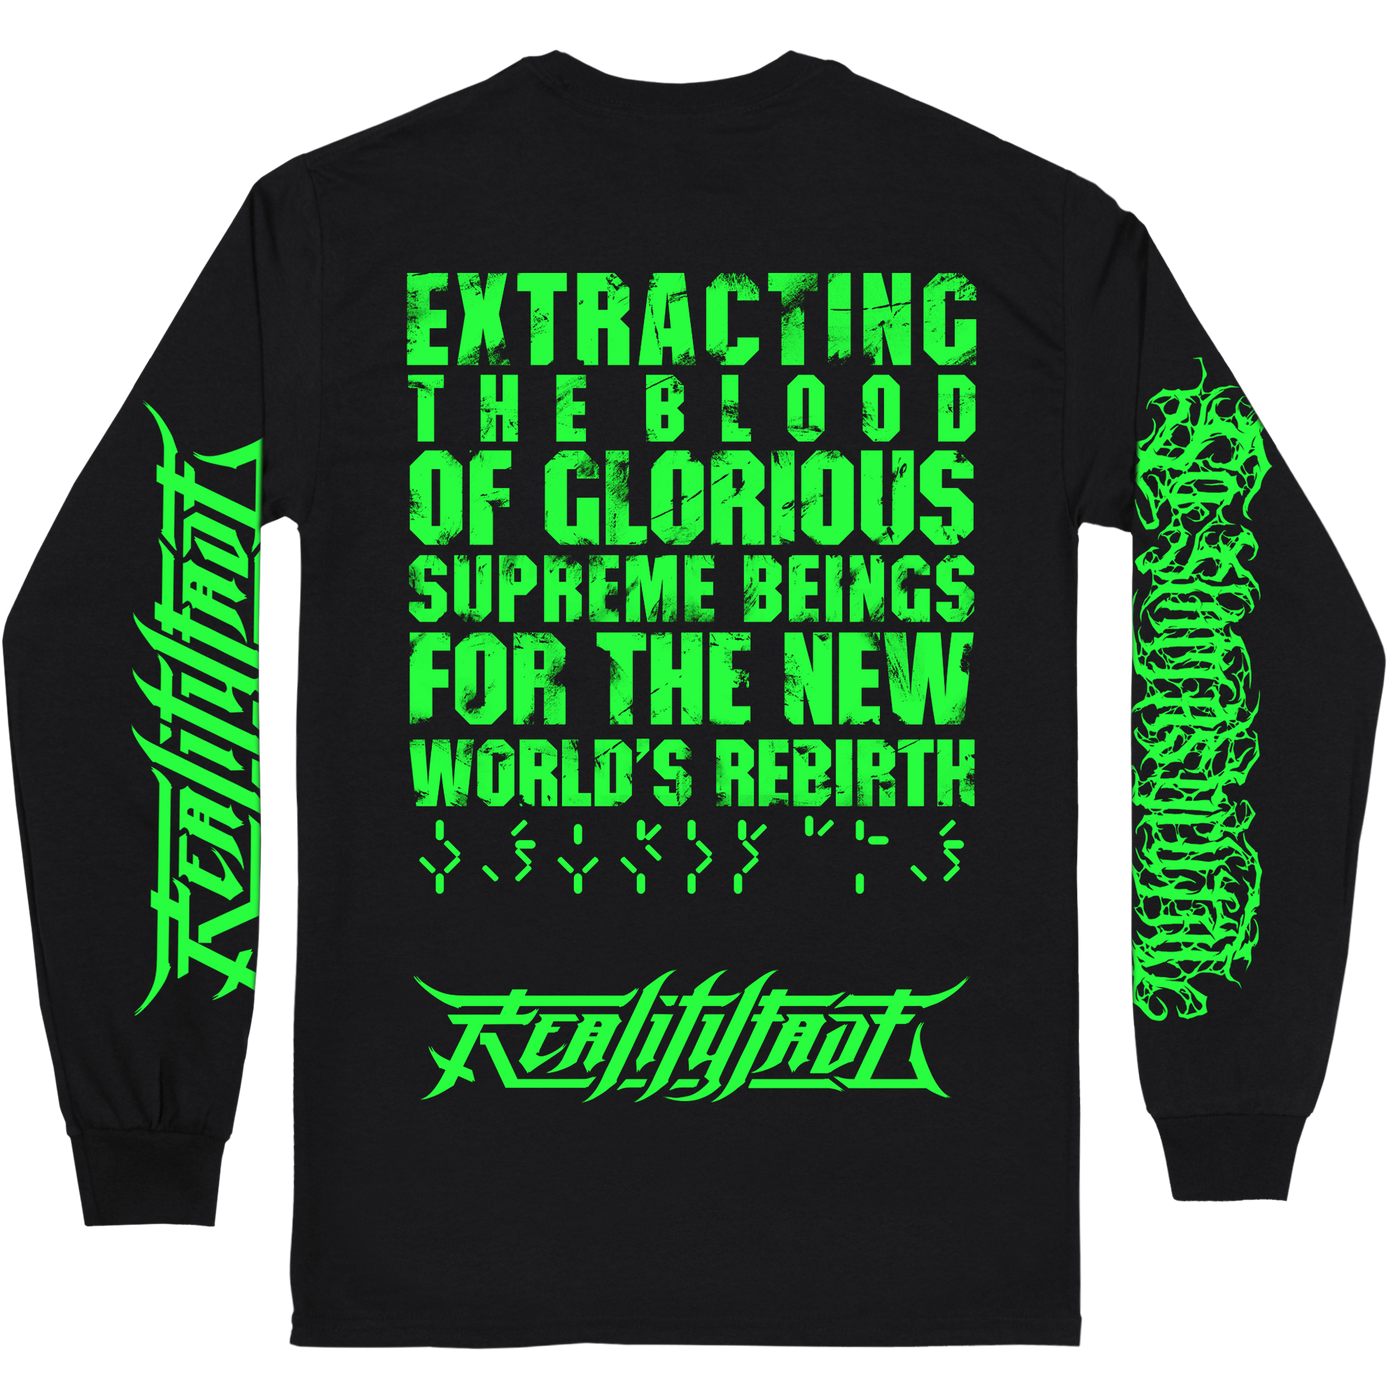 Esophagus 'Defeated by Their Inferiority' Long Sleeve | PRE-ORDER